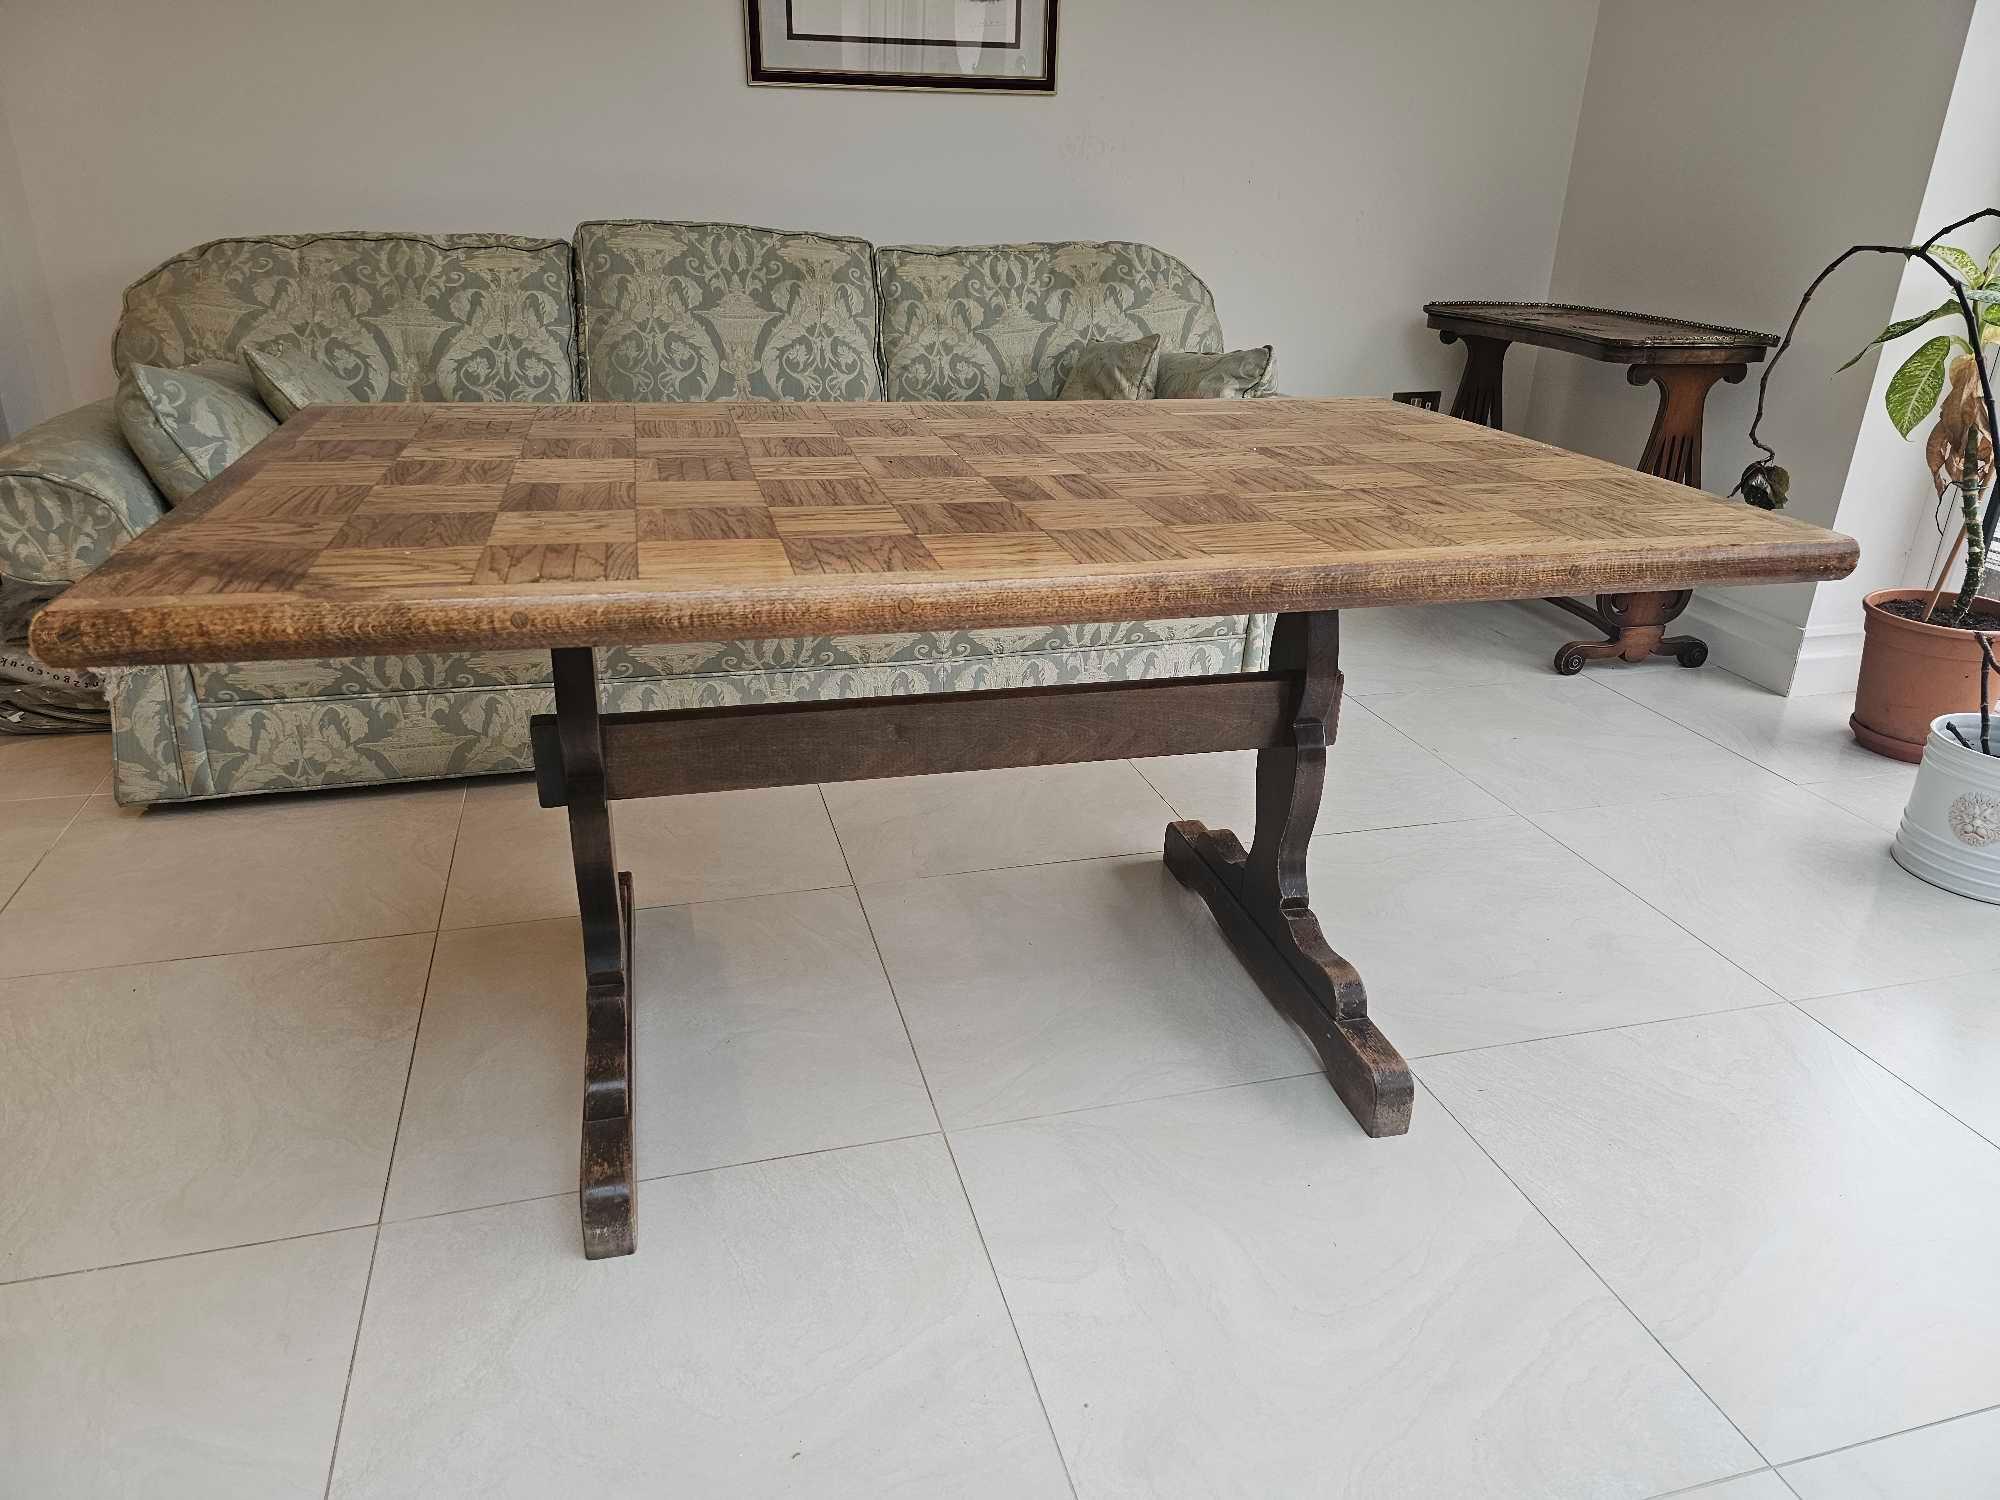 An Oak Trestle Dining Table With Parquetry Lattice Top 150 X 92 X 74cm